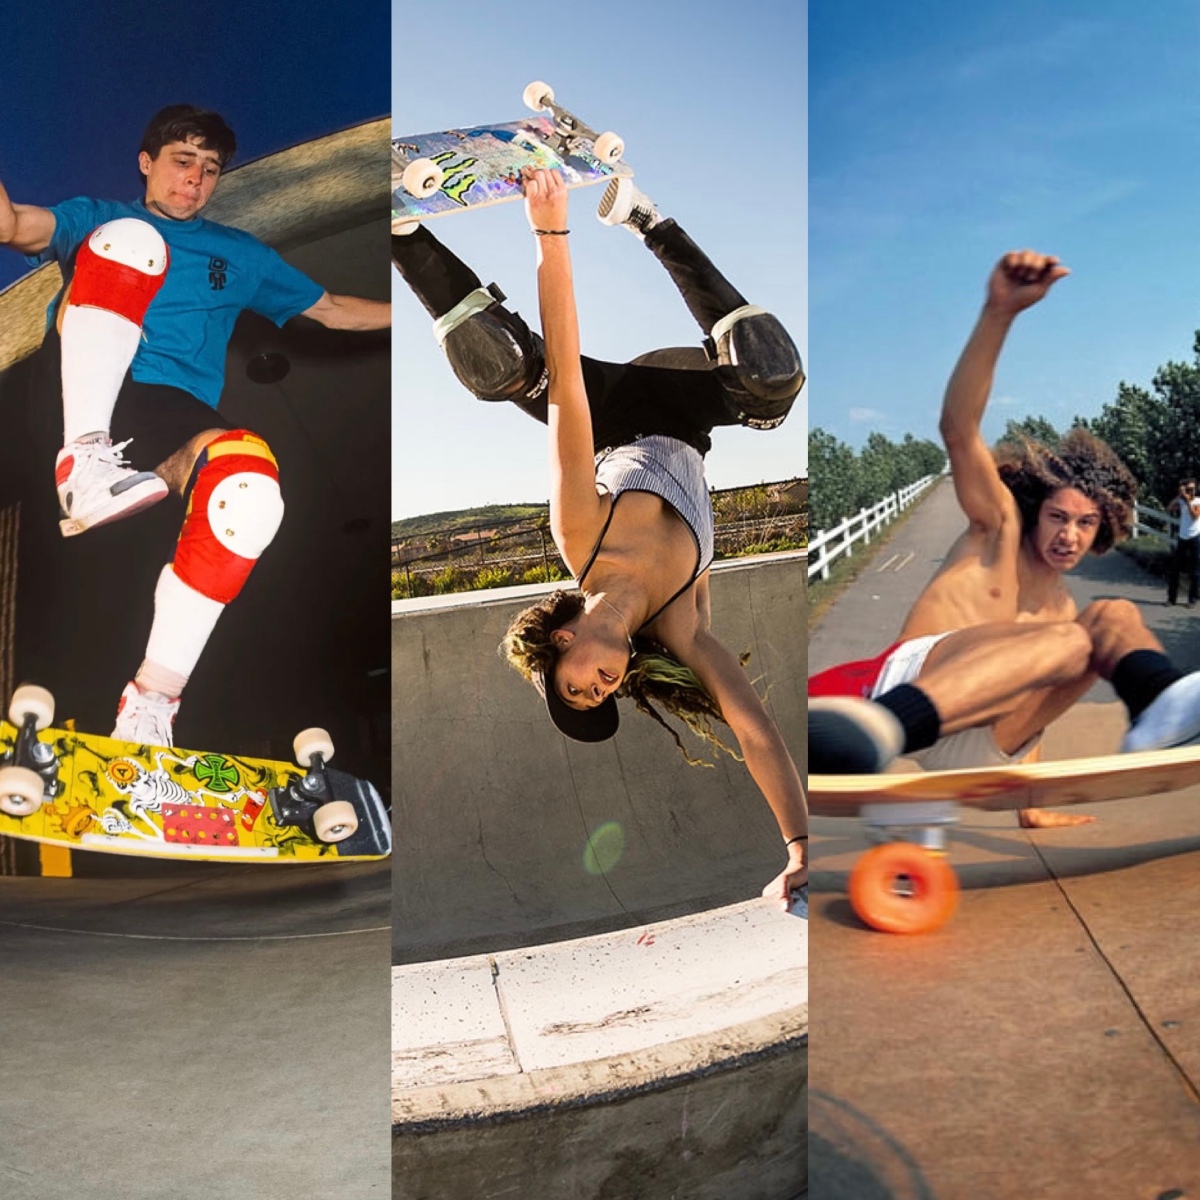 Special: The Best Skateboarders Of All Time